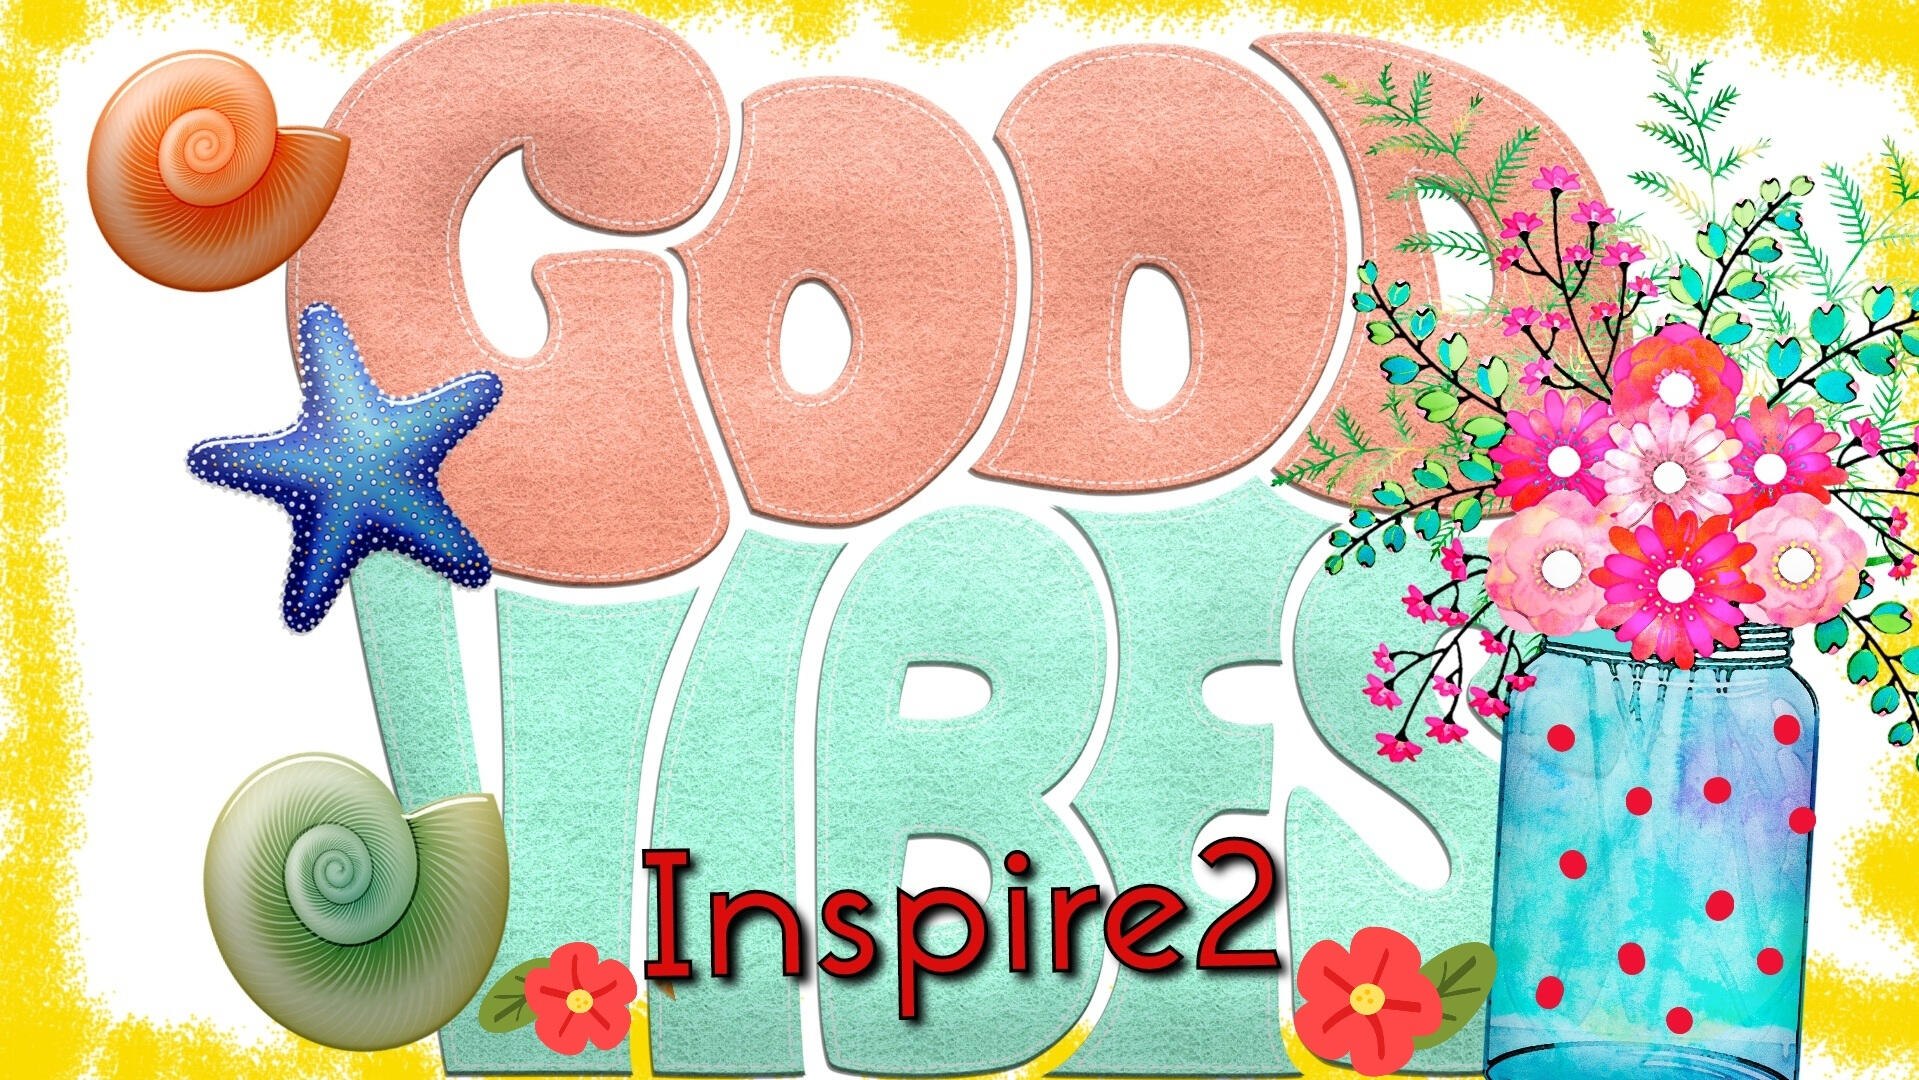 "Good Vibes" is the background text, in blue and pink fancy letters. In the forefront, in red letters is the word, "Inspire2", the name of the website for motivational quotes downloads. Red, small blue and pink flowers are surround with hints of yellow .